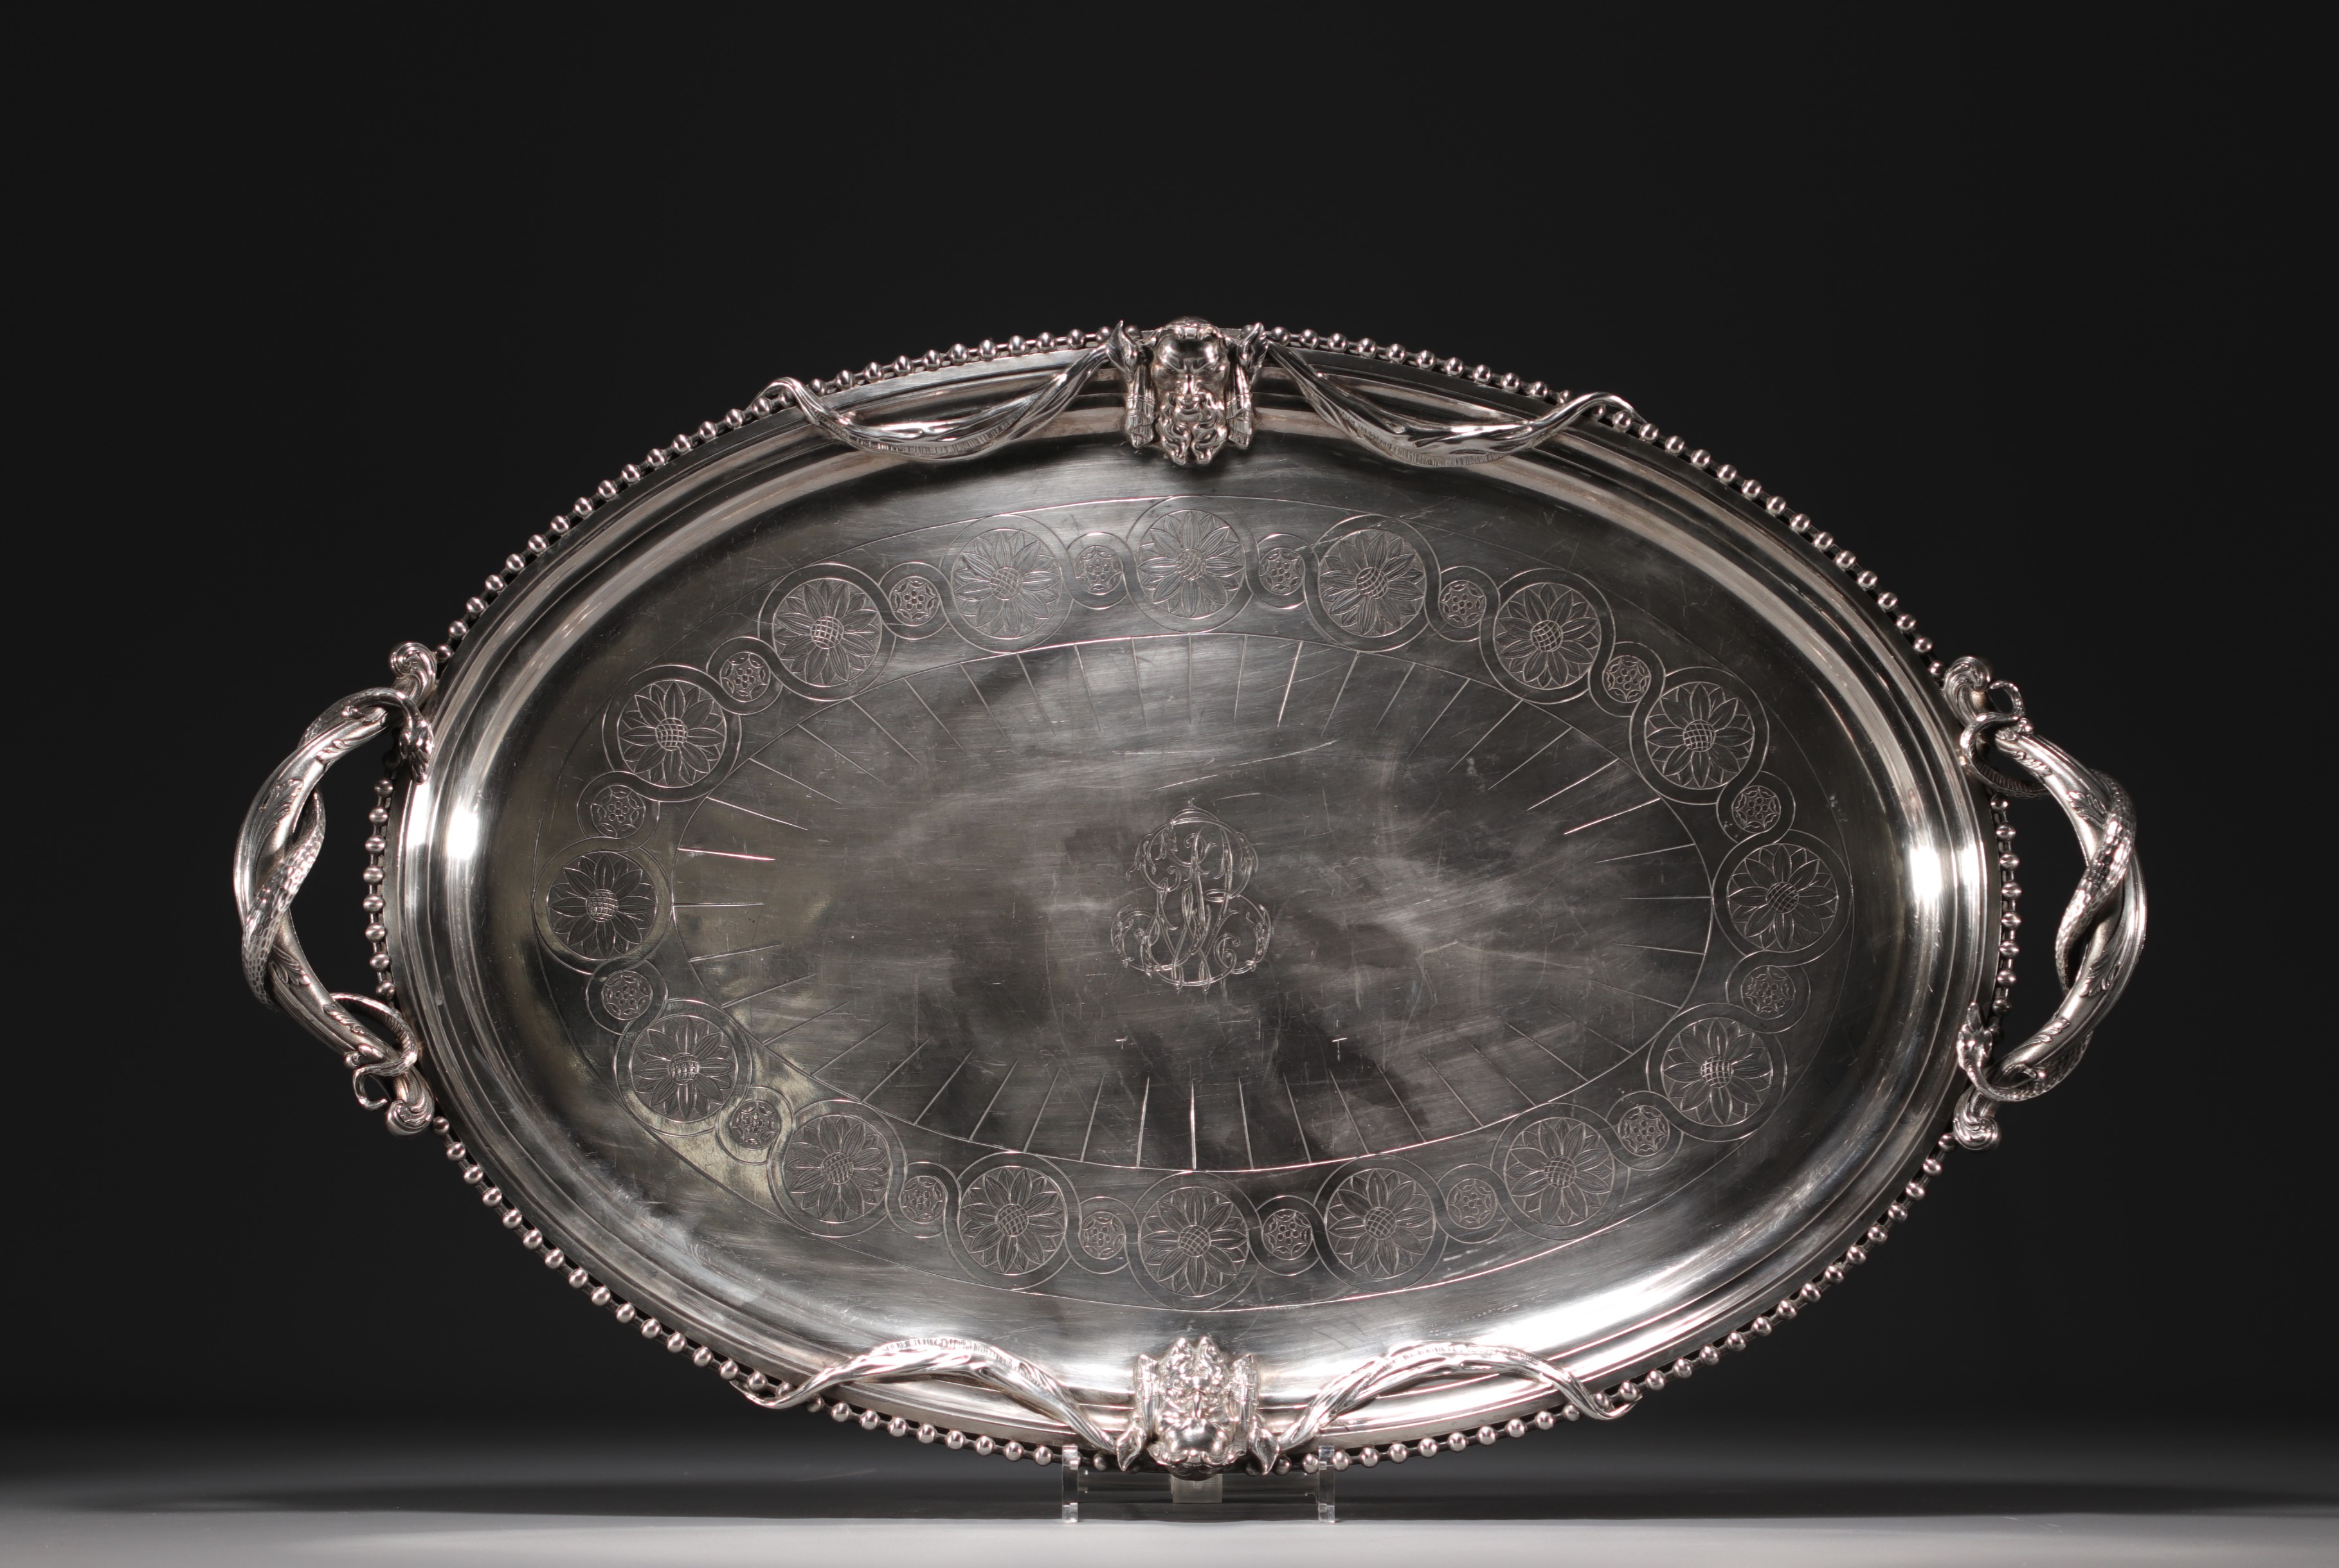 Antoine CARDEILHAC - Exceptional Regency-style solid silver service, 19th century. - Image 2 of 15